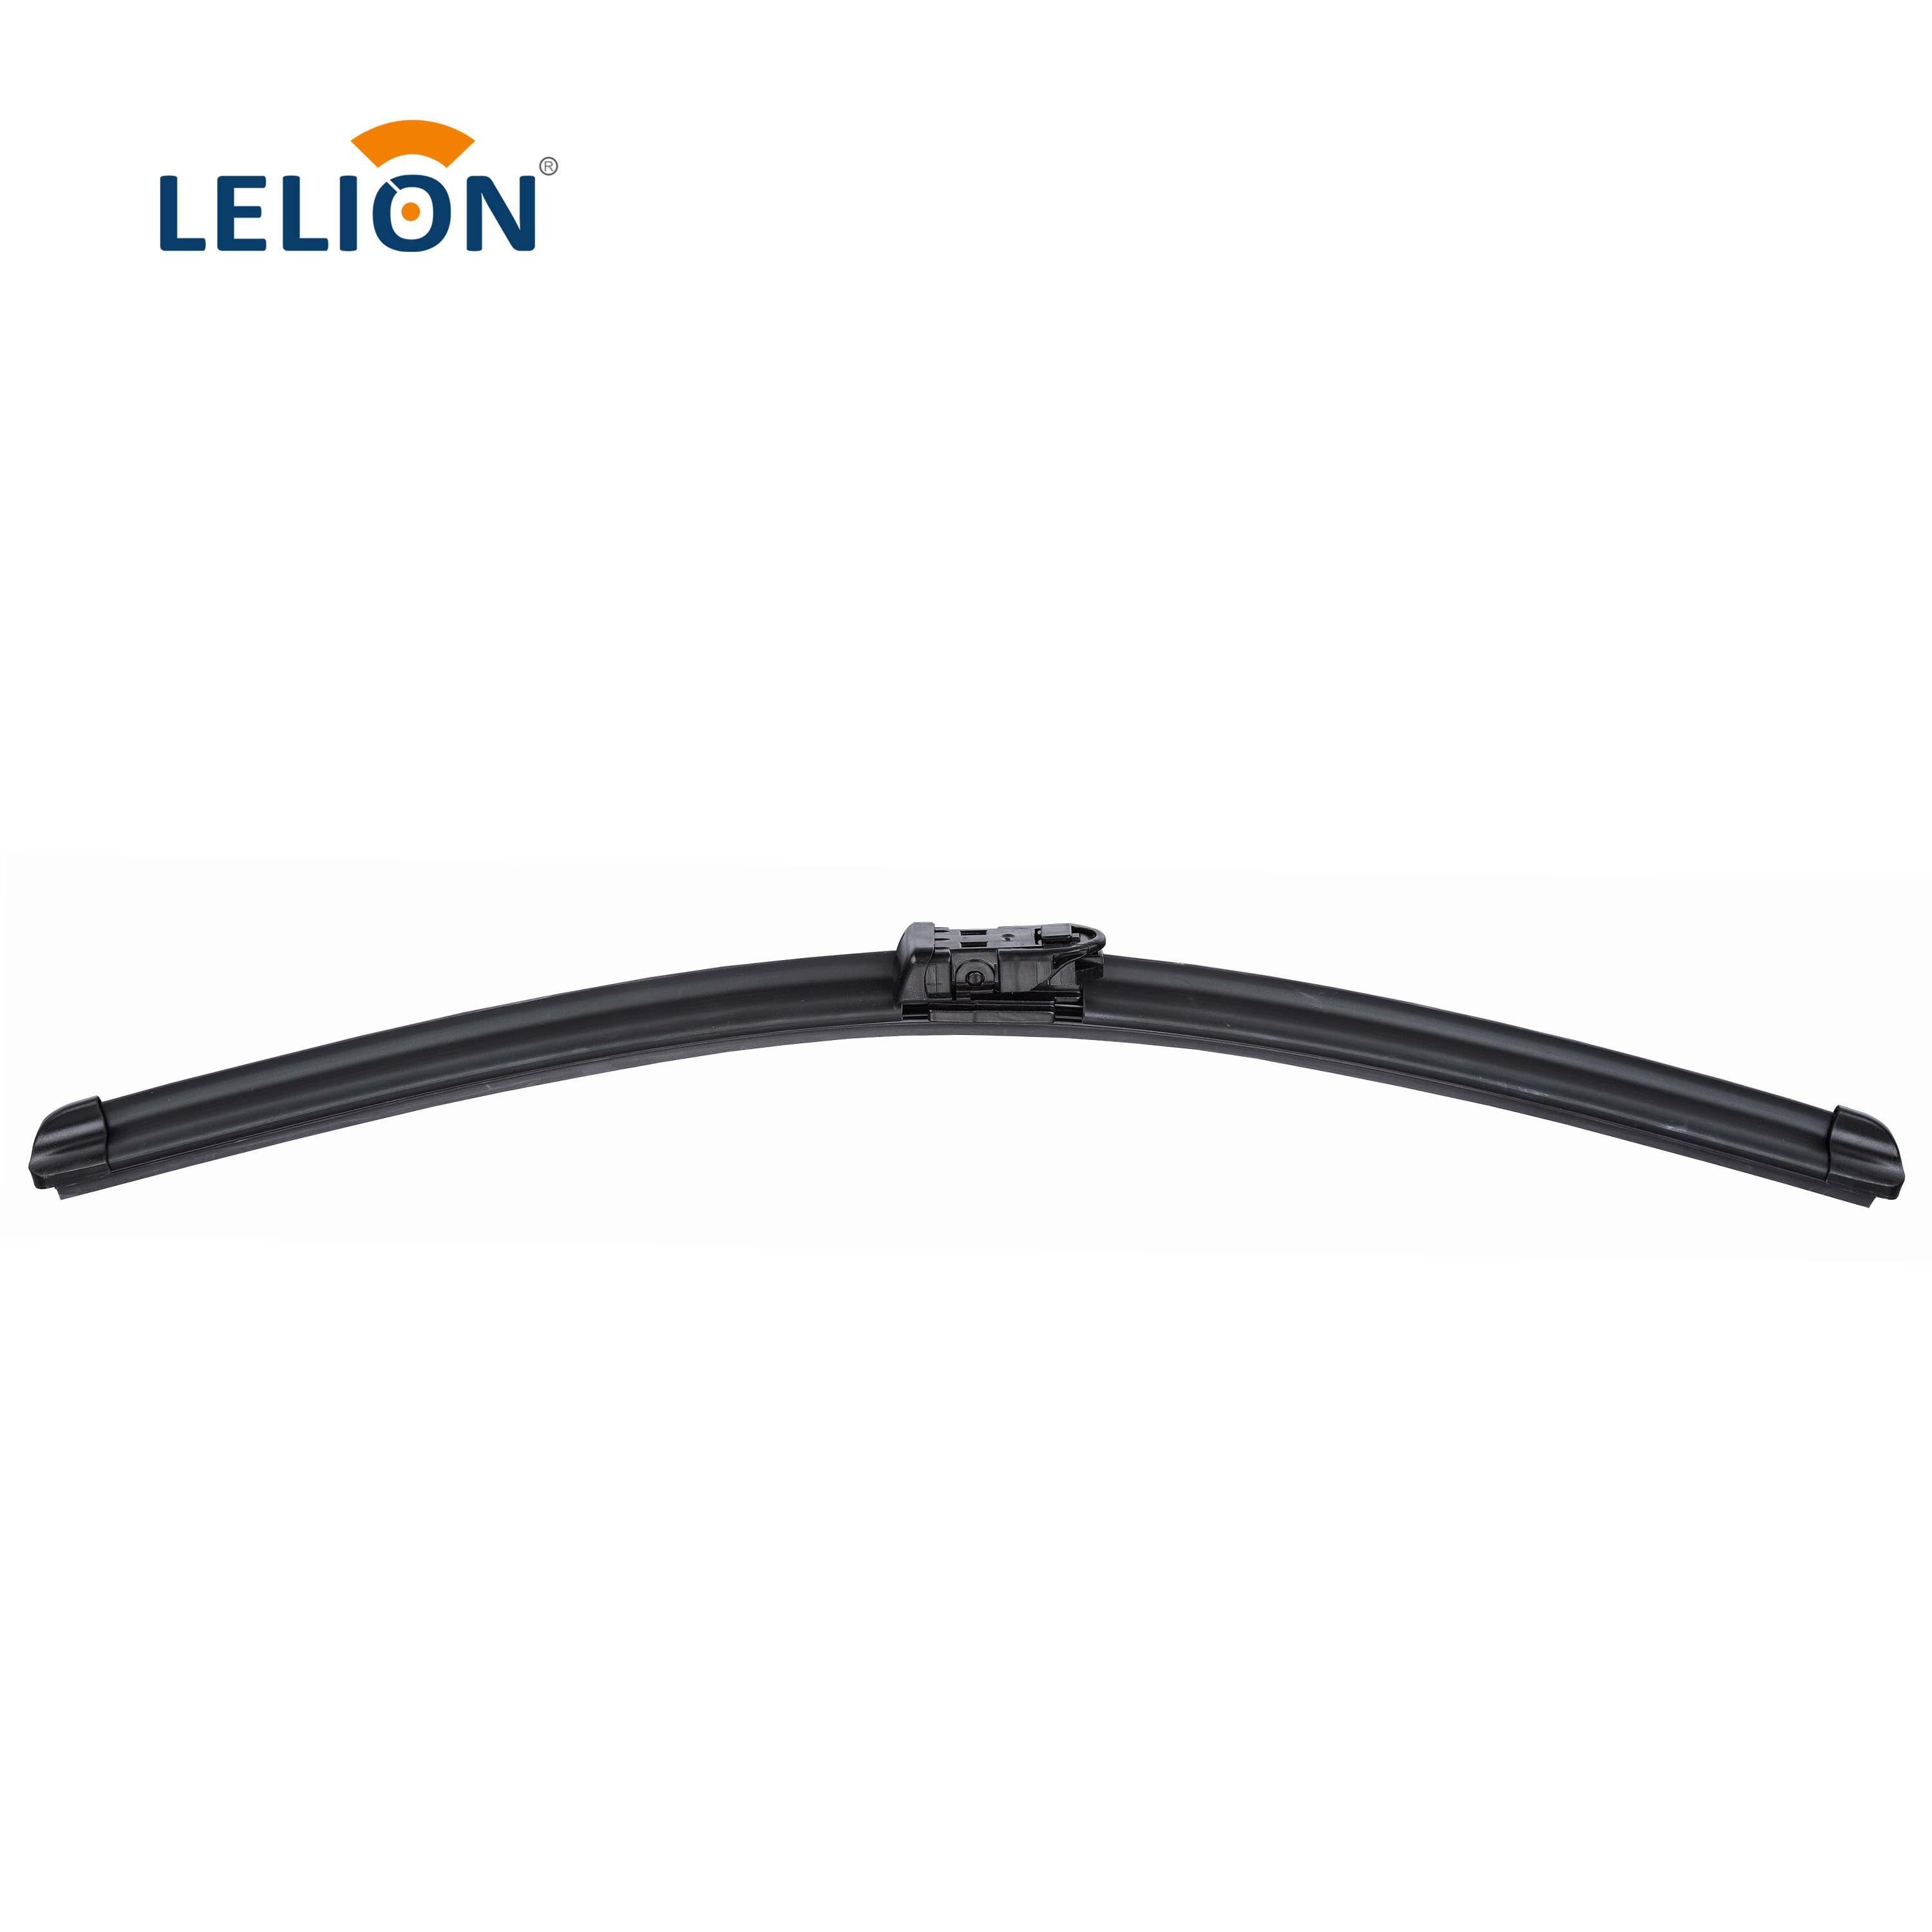 LELION 838 Premium OE Exact Fit Flat Wiper Blade for Buick Excelle/Ford Focus/Peugeot 408